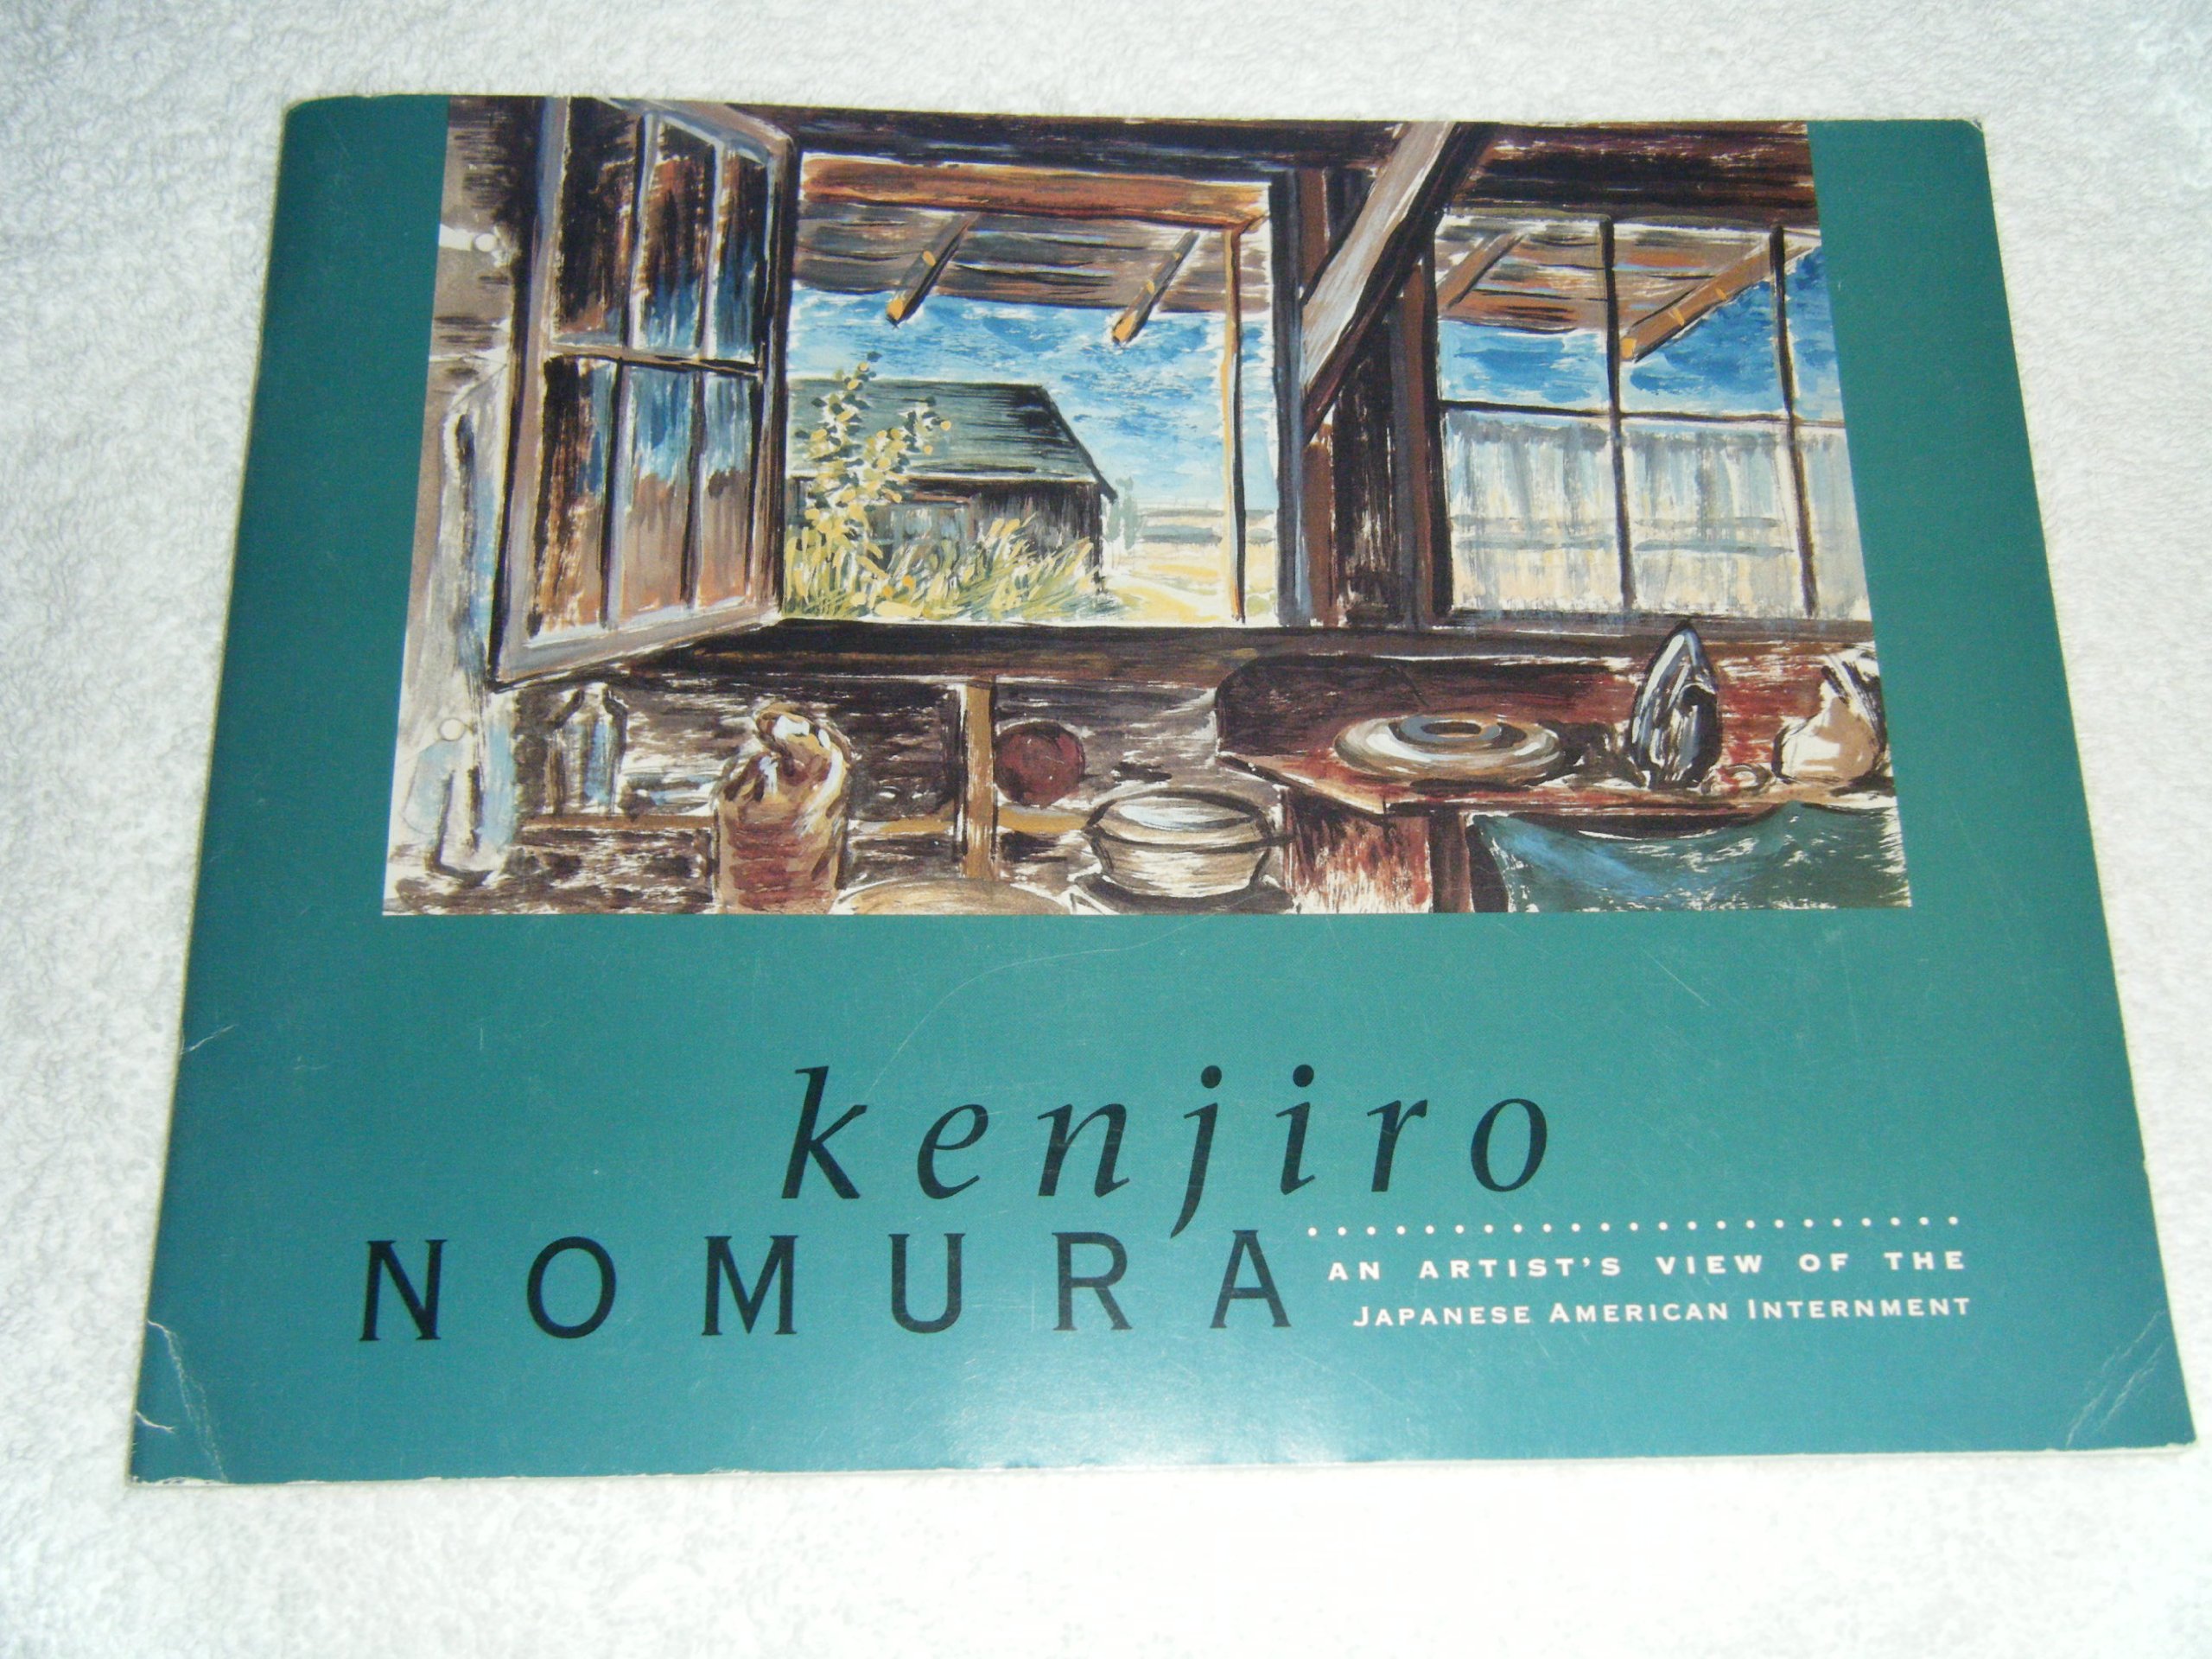 Kenjiro Nomura: An artist's view of the Japanese American internment (book cover)